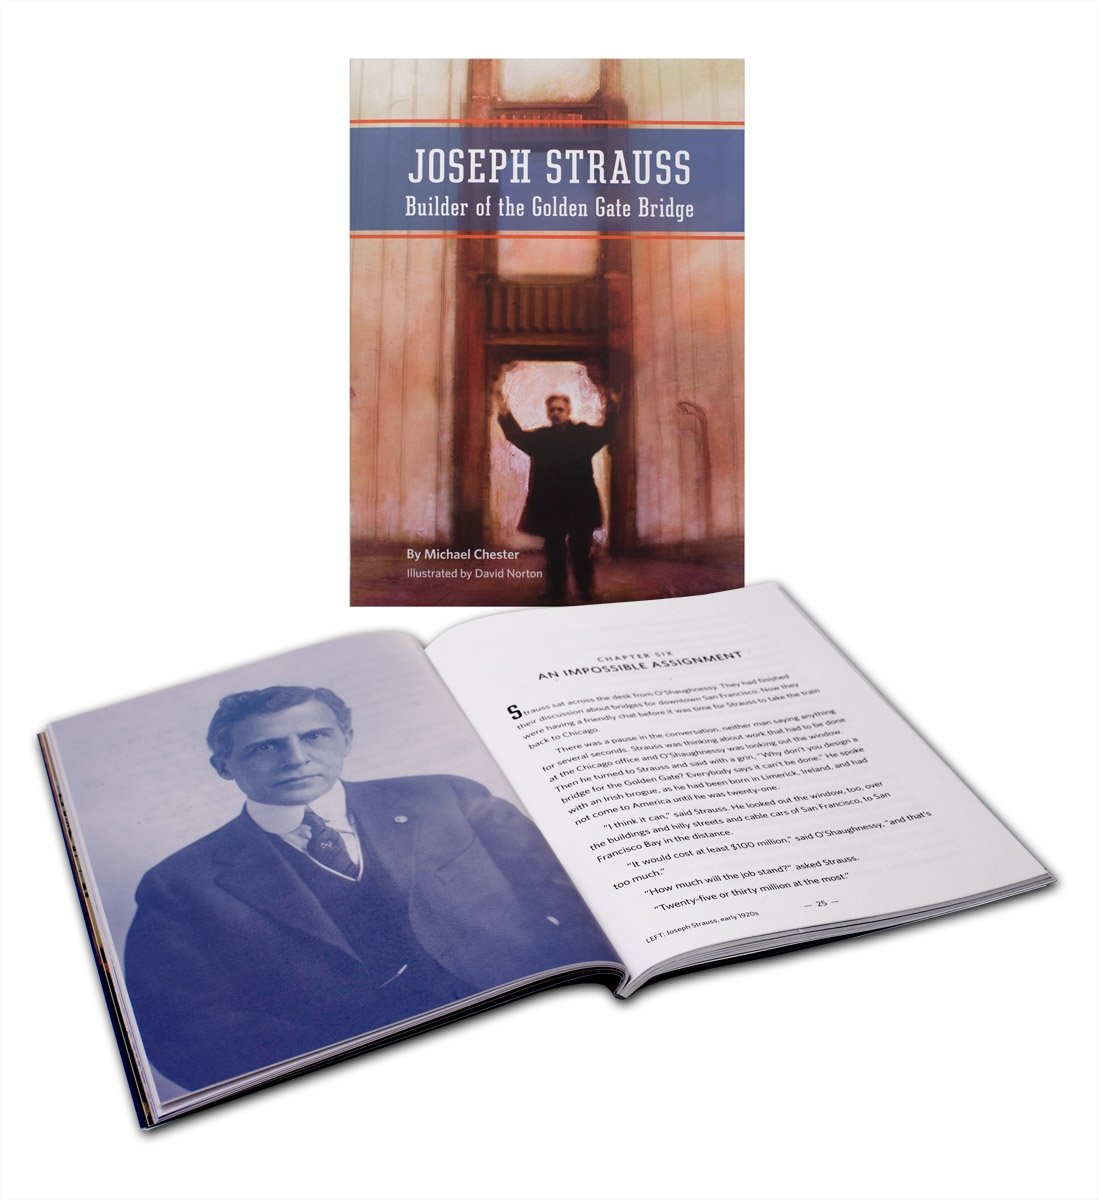 Young adult book "Joseph Strauss: Builder of the Golden Gate Bridge" by Michael Chester, Illustrated by David Norton.